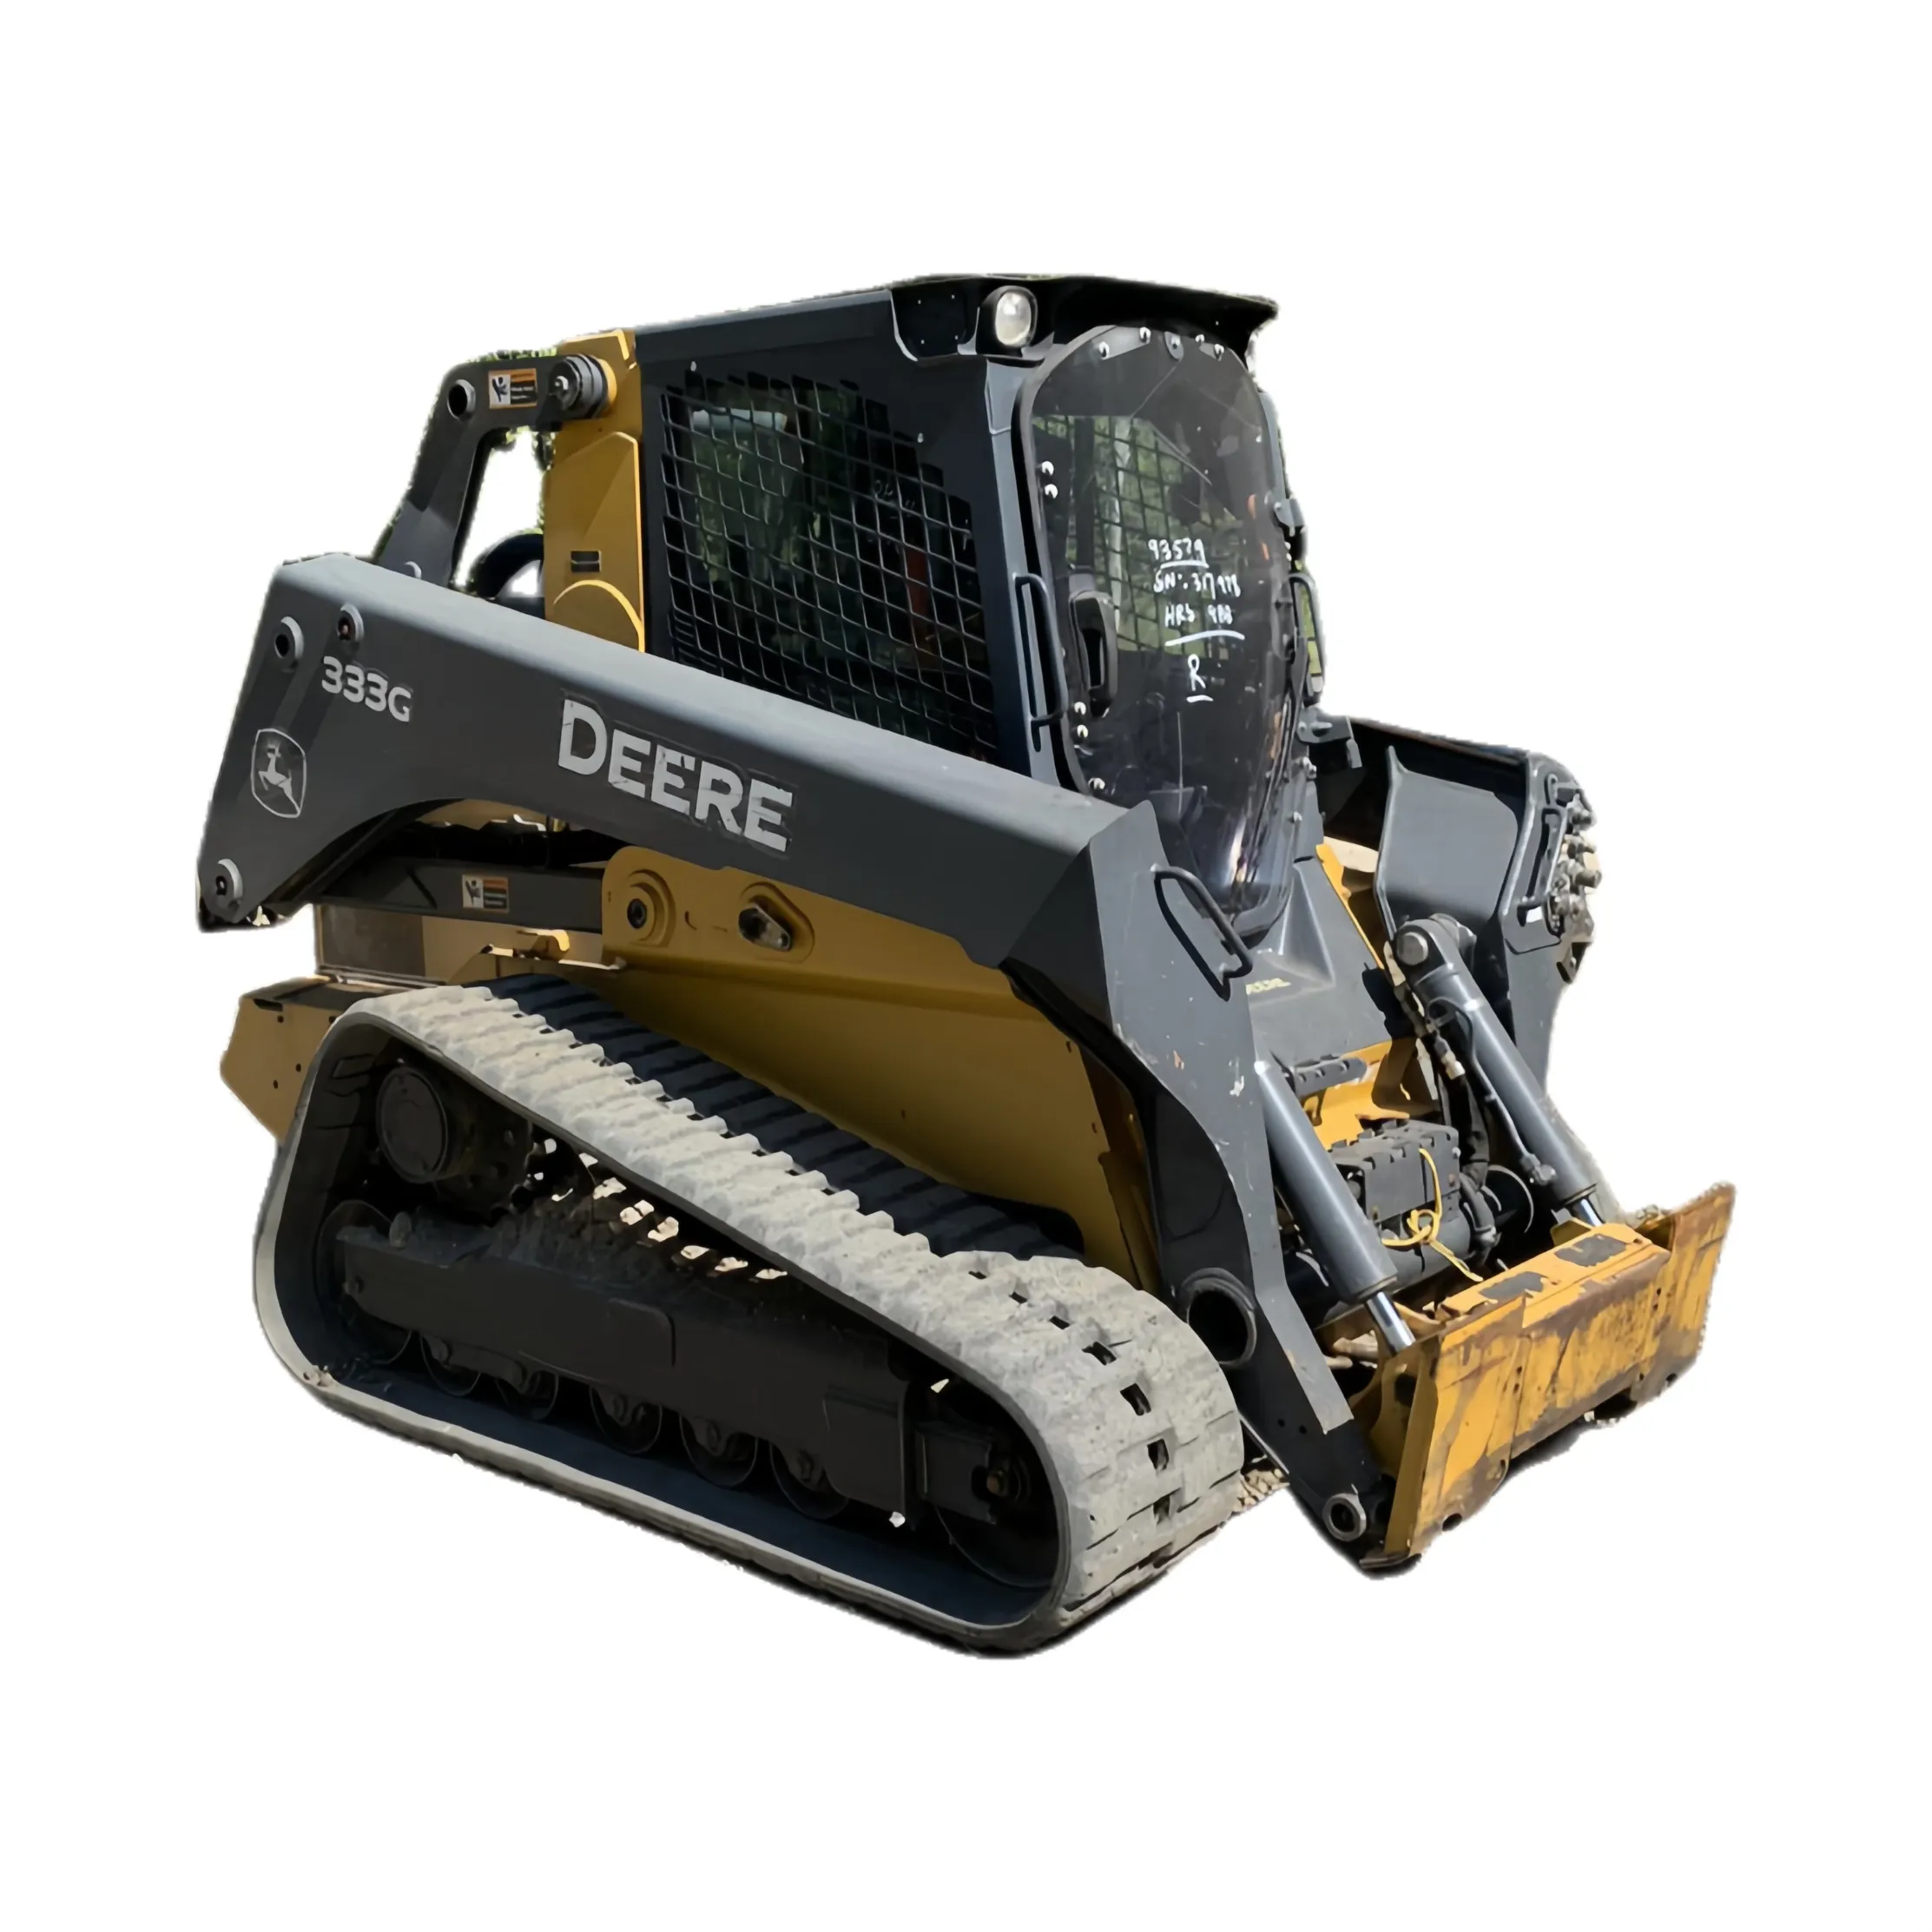 Company Rush Sale Used DEERE 333G EPA Compact Loader with EROPS High flow 2 speed quick attach Fast Shipping with Insurance